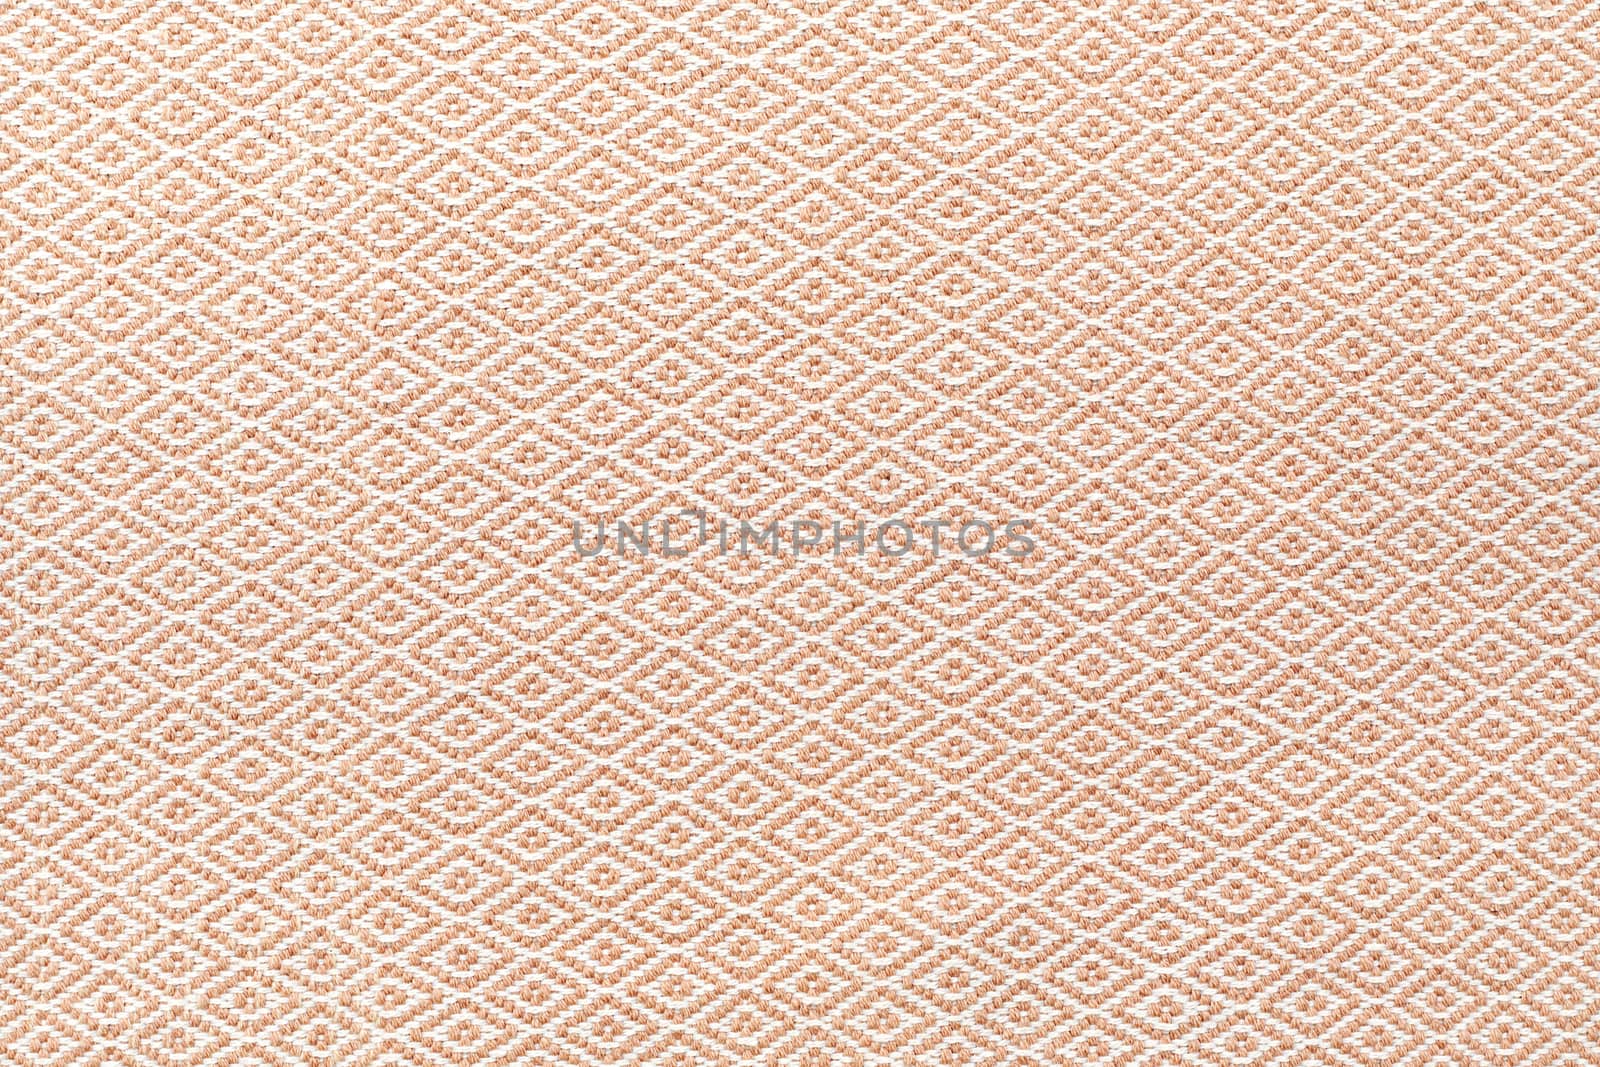 Brown lace fabric silk background texture.